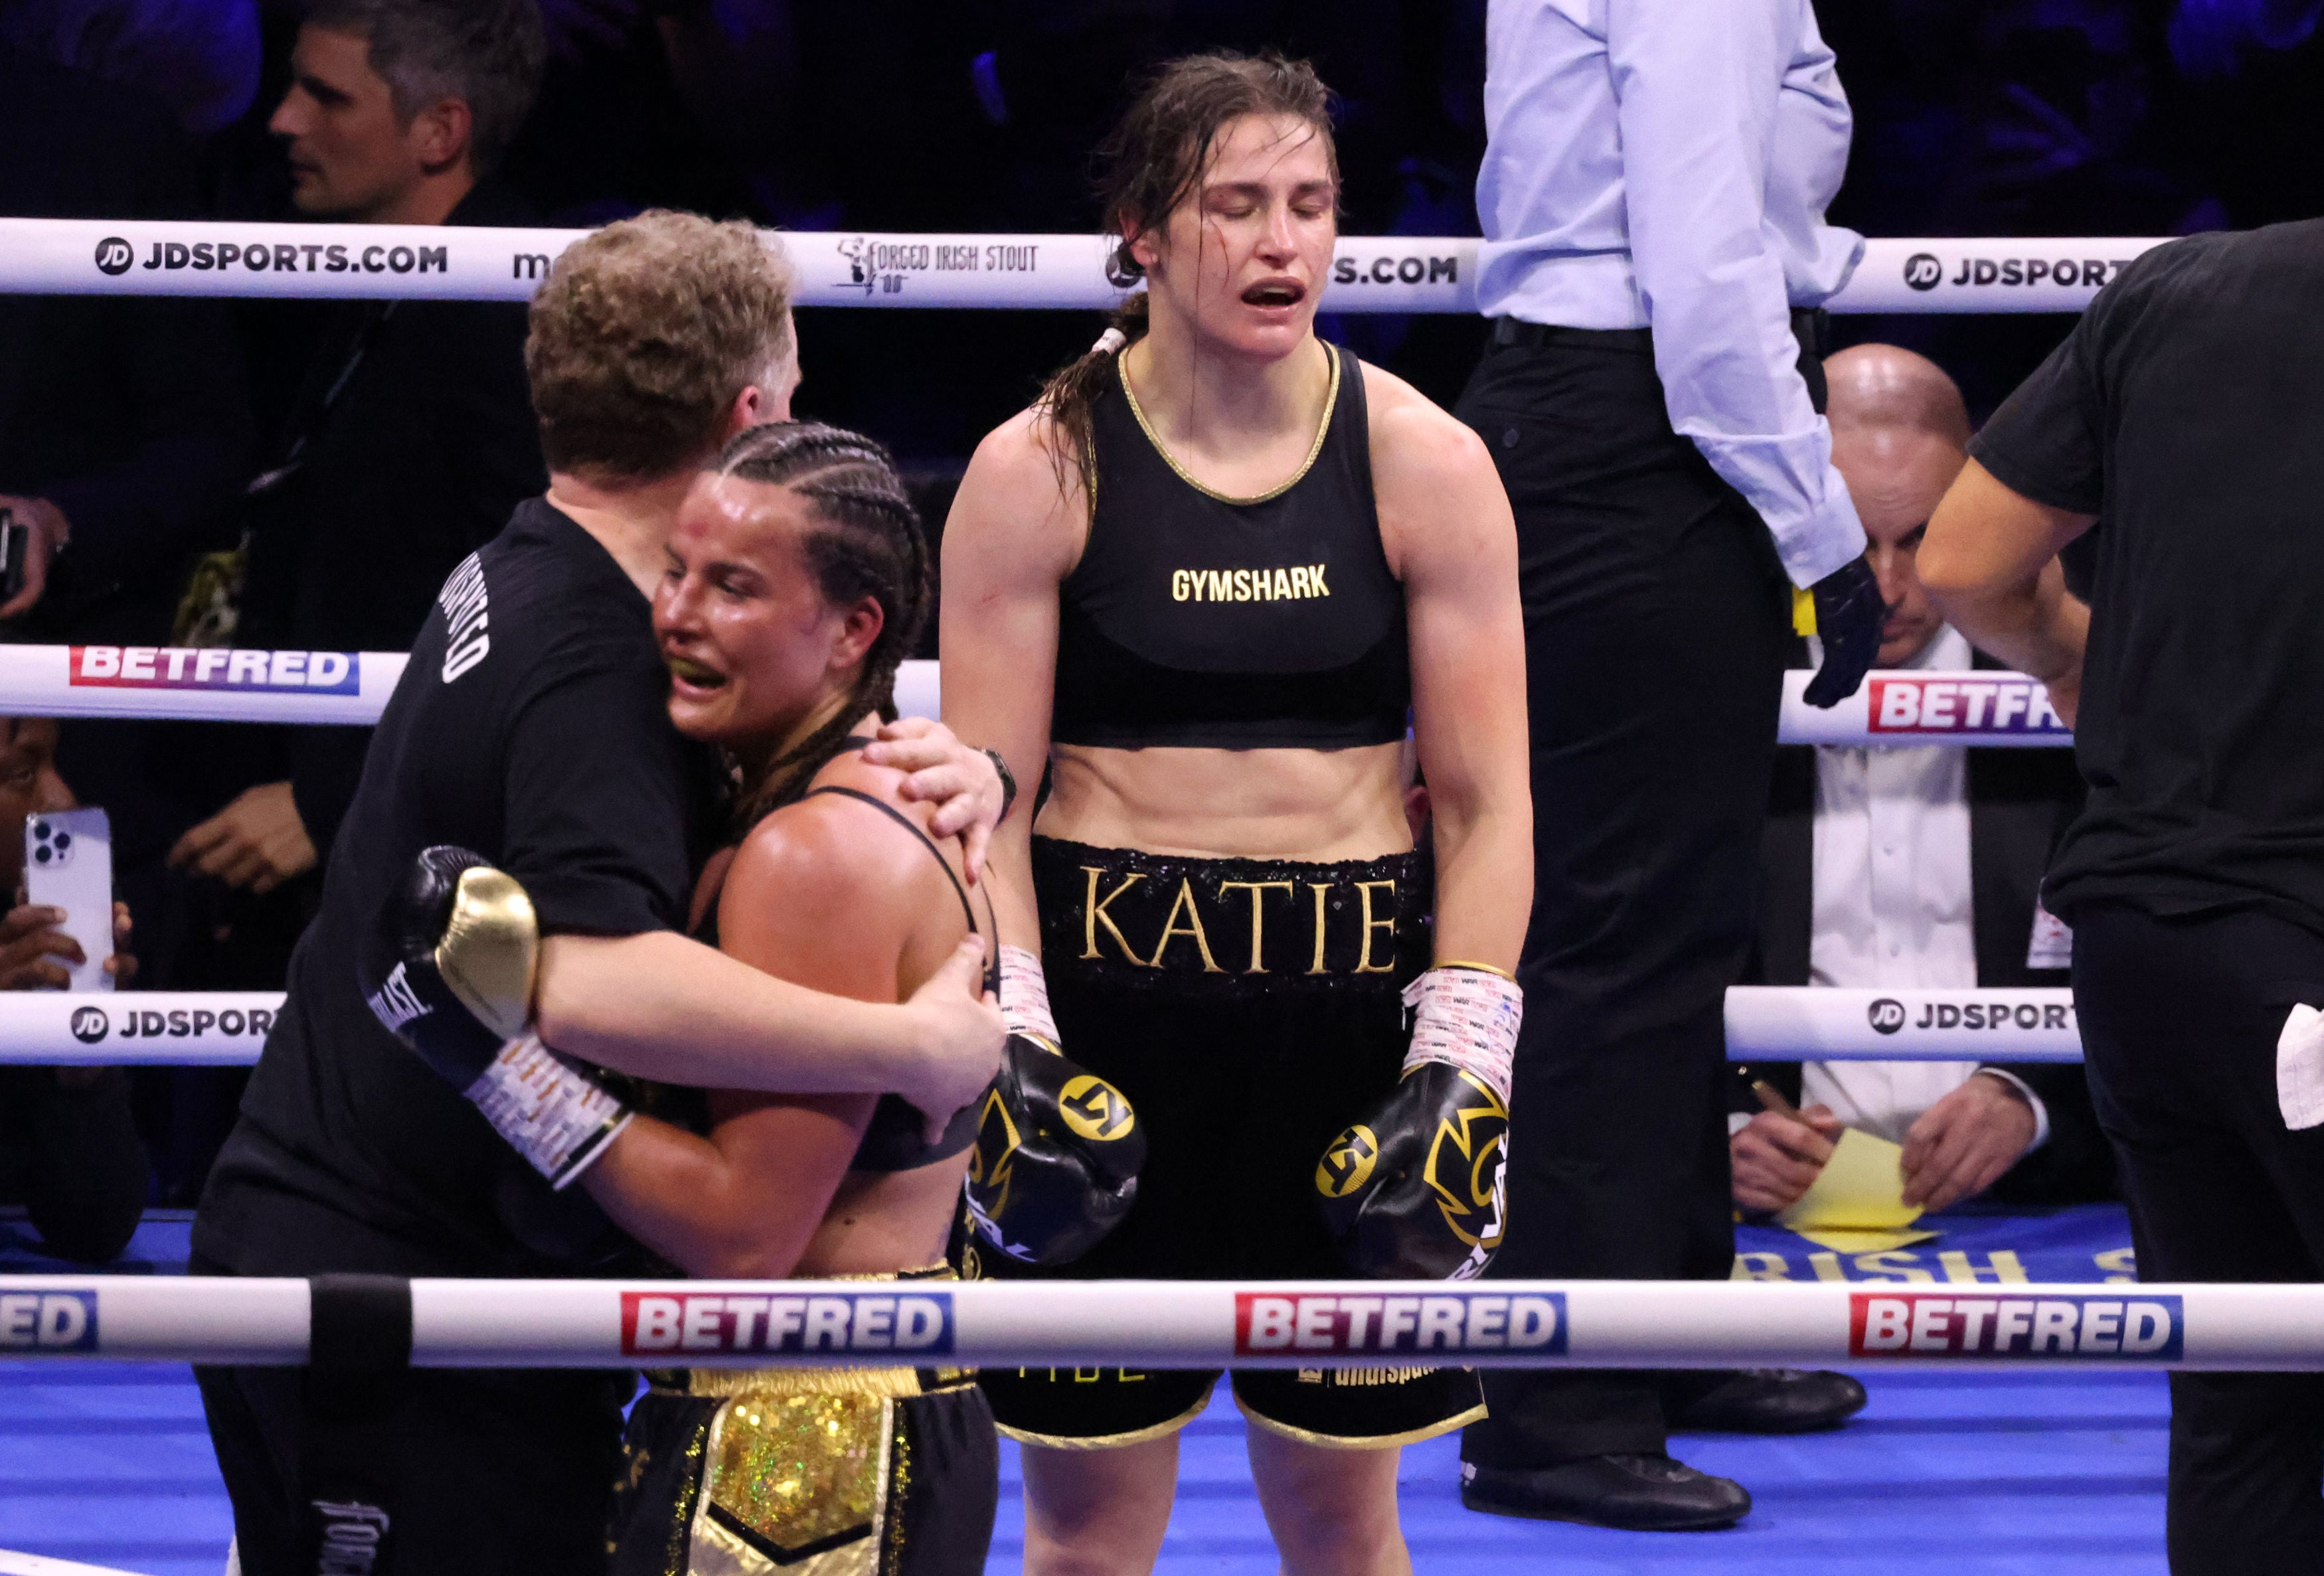 A defeated Katie Taylor stands in disbelief after her title fight against Chantelle Cameron at the 3Arena in Dublin